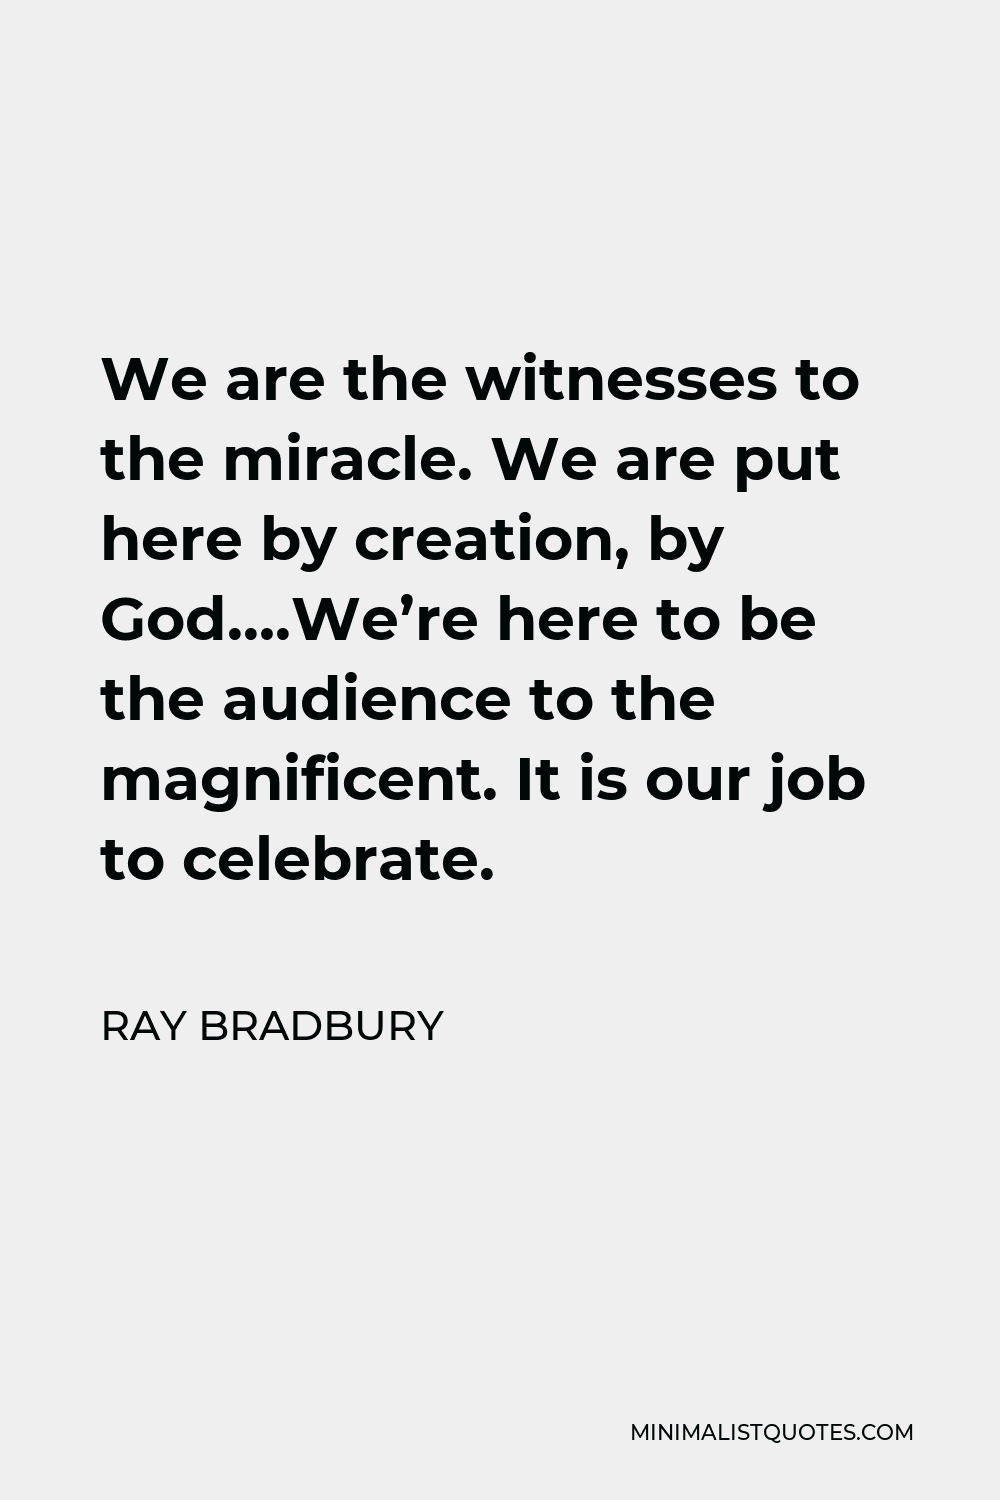 Ray Bradbury Quote - We are the witnesses to the miracle. We are put here by creation, by God….We’re here to be the audience to the magnificent. It is our job to celebrate.